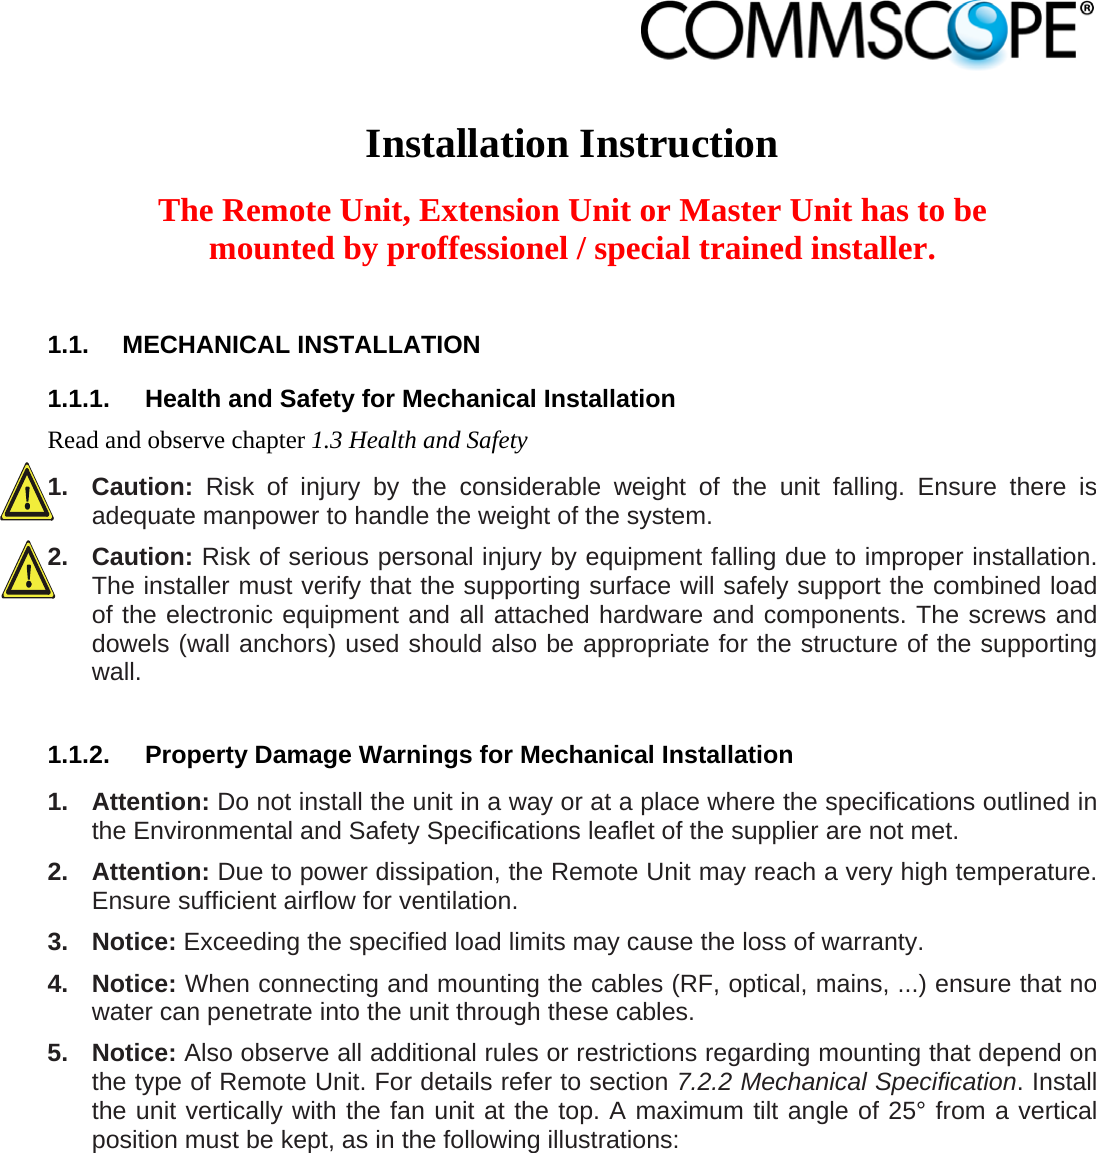                             Installation Instruction  The Remote Unit, Extension Unit or Master Unit has to be mounted by proffessionel / special trained installer.  1.1. MECHANICAL INSTALLATION 1.1.1.  Health and Safety for Mechanical Installation Read and observe chapter 1.3 Health and Safety 1. Caution: Risk of injury by the considerable weight of the unit falling. Ensure there is adequate manpower to handle the weight of the system. 2. Caution: Risk of serious personal injury by equipment falling due to improper installation. The installer must verify that the supporting surface will safely support the combined load of the electronic equipment and all attached hardware and components. The screws and dowels (wall anchors) used should also be appropriate for the structure of the supporting wall.  1.1.2.  Property Damage Warnings for Mechanical Installation 1. Attention: Do not install the unit in a way or at a place where the specifications outlined in the Environmental and Safety Specifications leaflet of the supplier are not met. 2. Attention: Due to power dissipation, the Remote Unit may reach a very high temperature. Ensure sufficient airflow for ventilation. 3. Notice: Exceeding the specified load limits may cause the loss of warranty. 4. Notice: When connecting and mounting the cables (RF, optical, mains, ...) ensure that no water can penetrate into the unit through these cables. 5. Notice: Also observe all additional rules or restrictions regarding mounting that depend on the type of Remote Unit. For details refer to section 7.2.2 Mechanical Specification. Install the unit vertically with the fan unit at the top. A maximum tilt angle of 25° from a vertical position must be kept, as in the following illustrations:  